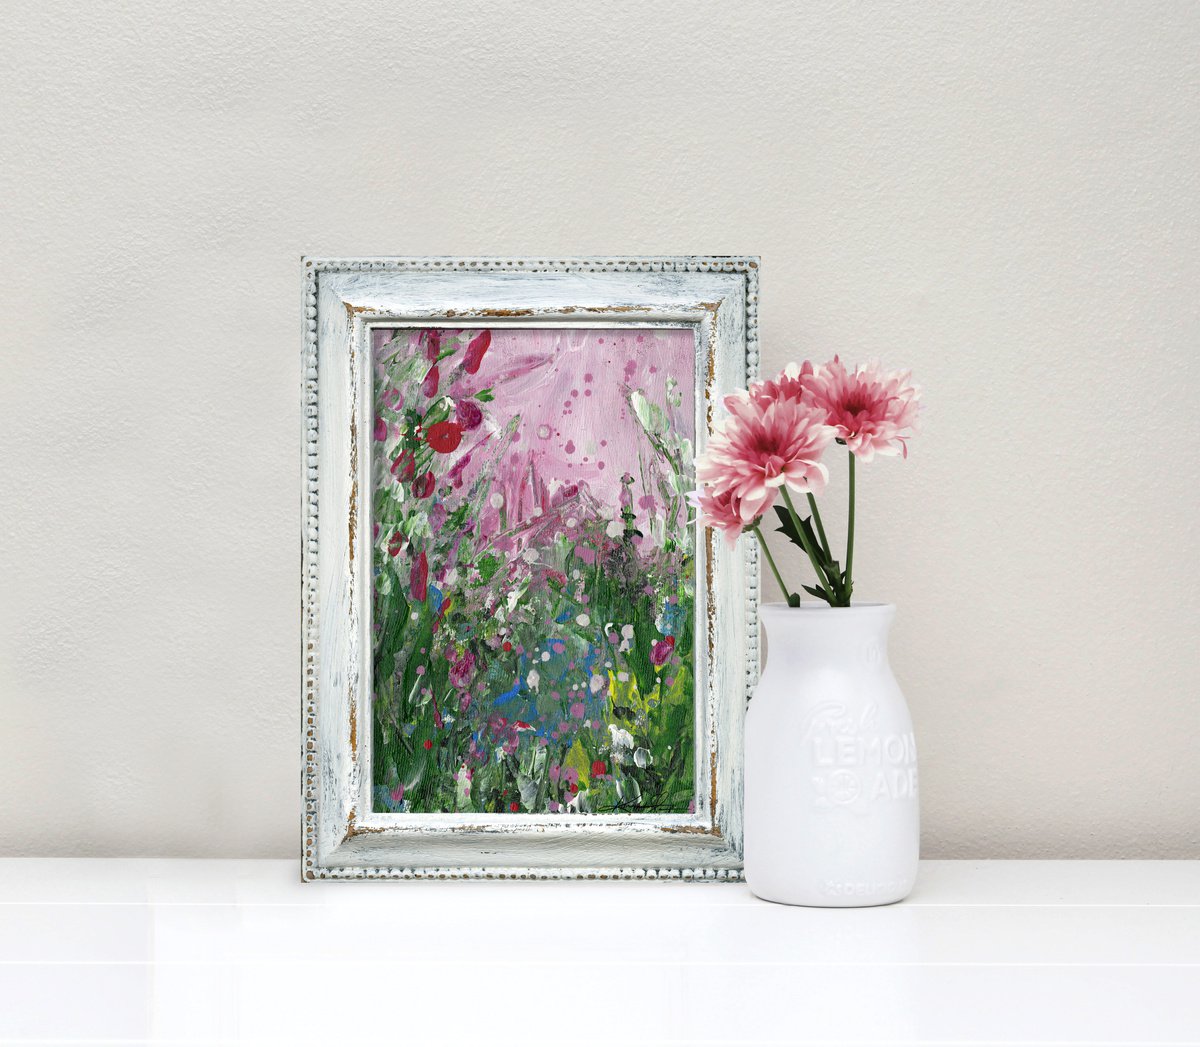 A Meadow Journey 4 - Framed Floral Painting by Kathy Morton Stanion by Kathy Morton Stanion